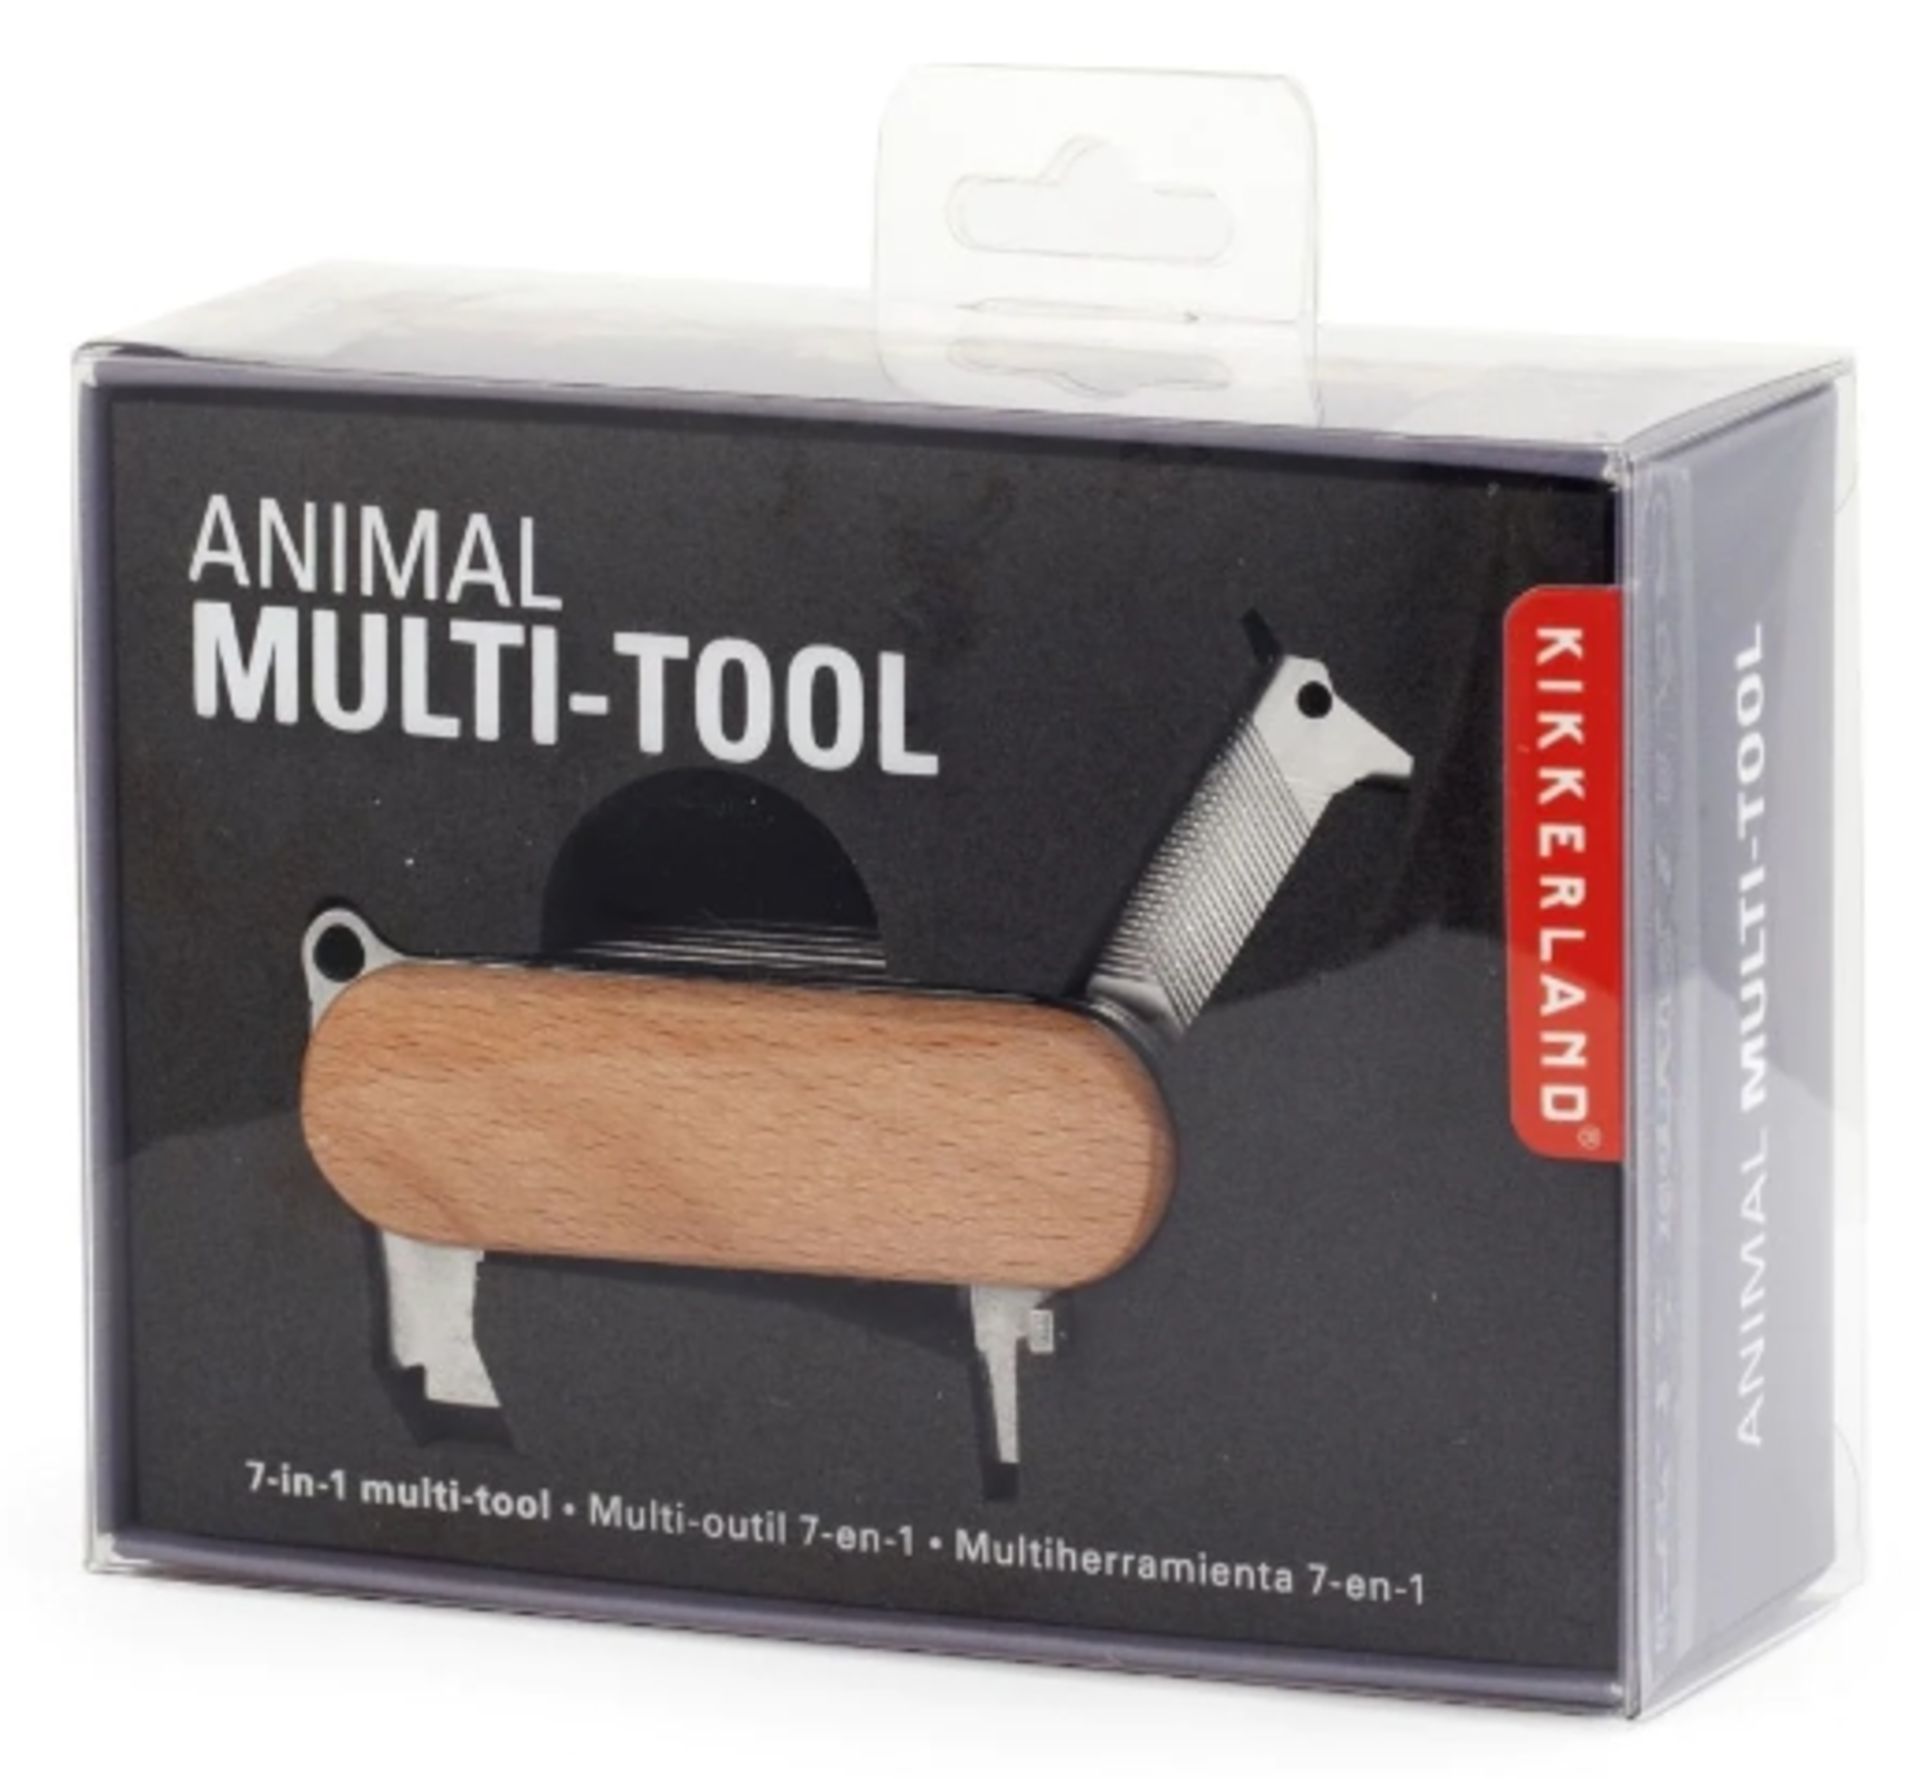 6 x Kikkerland Animal 7 in 1 Multi Tools - Features Screwdrivers, Bottle Openers, Wire Strippers and - Image 2 of 4